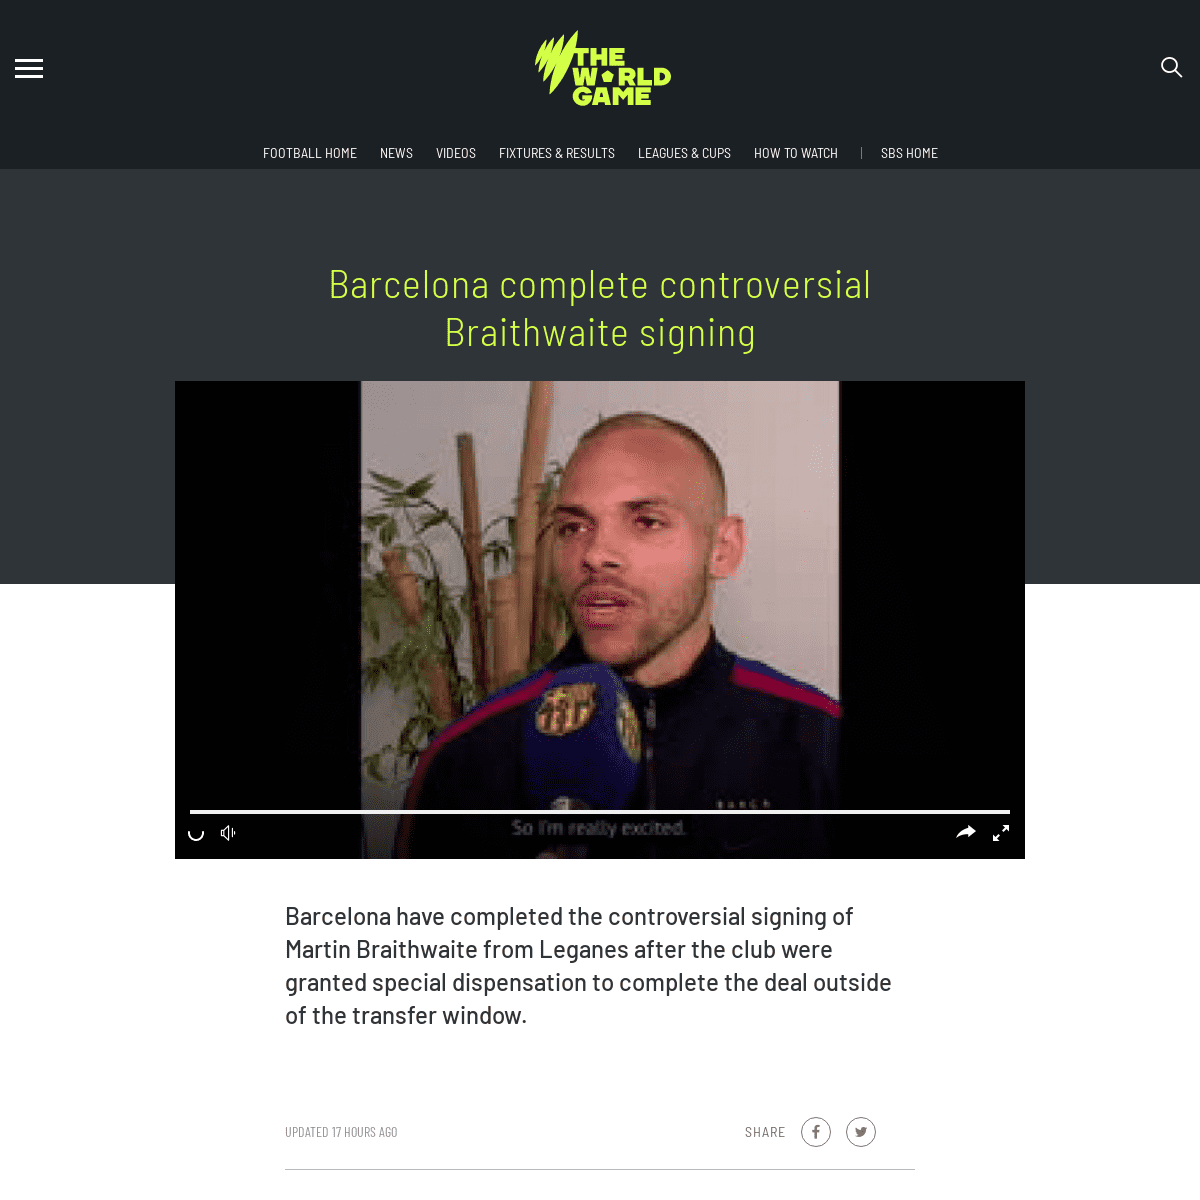 A complete backup of theworldgame.sbs.com.au/barcelona-complete-controversial-braithwaite-signing